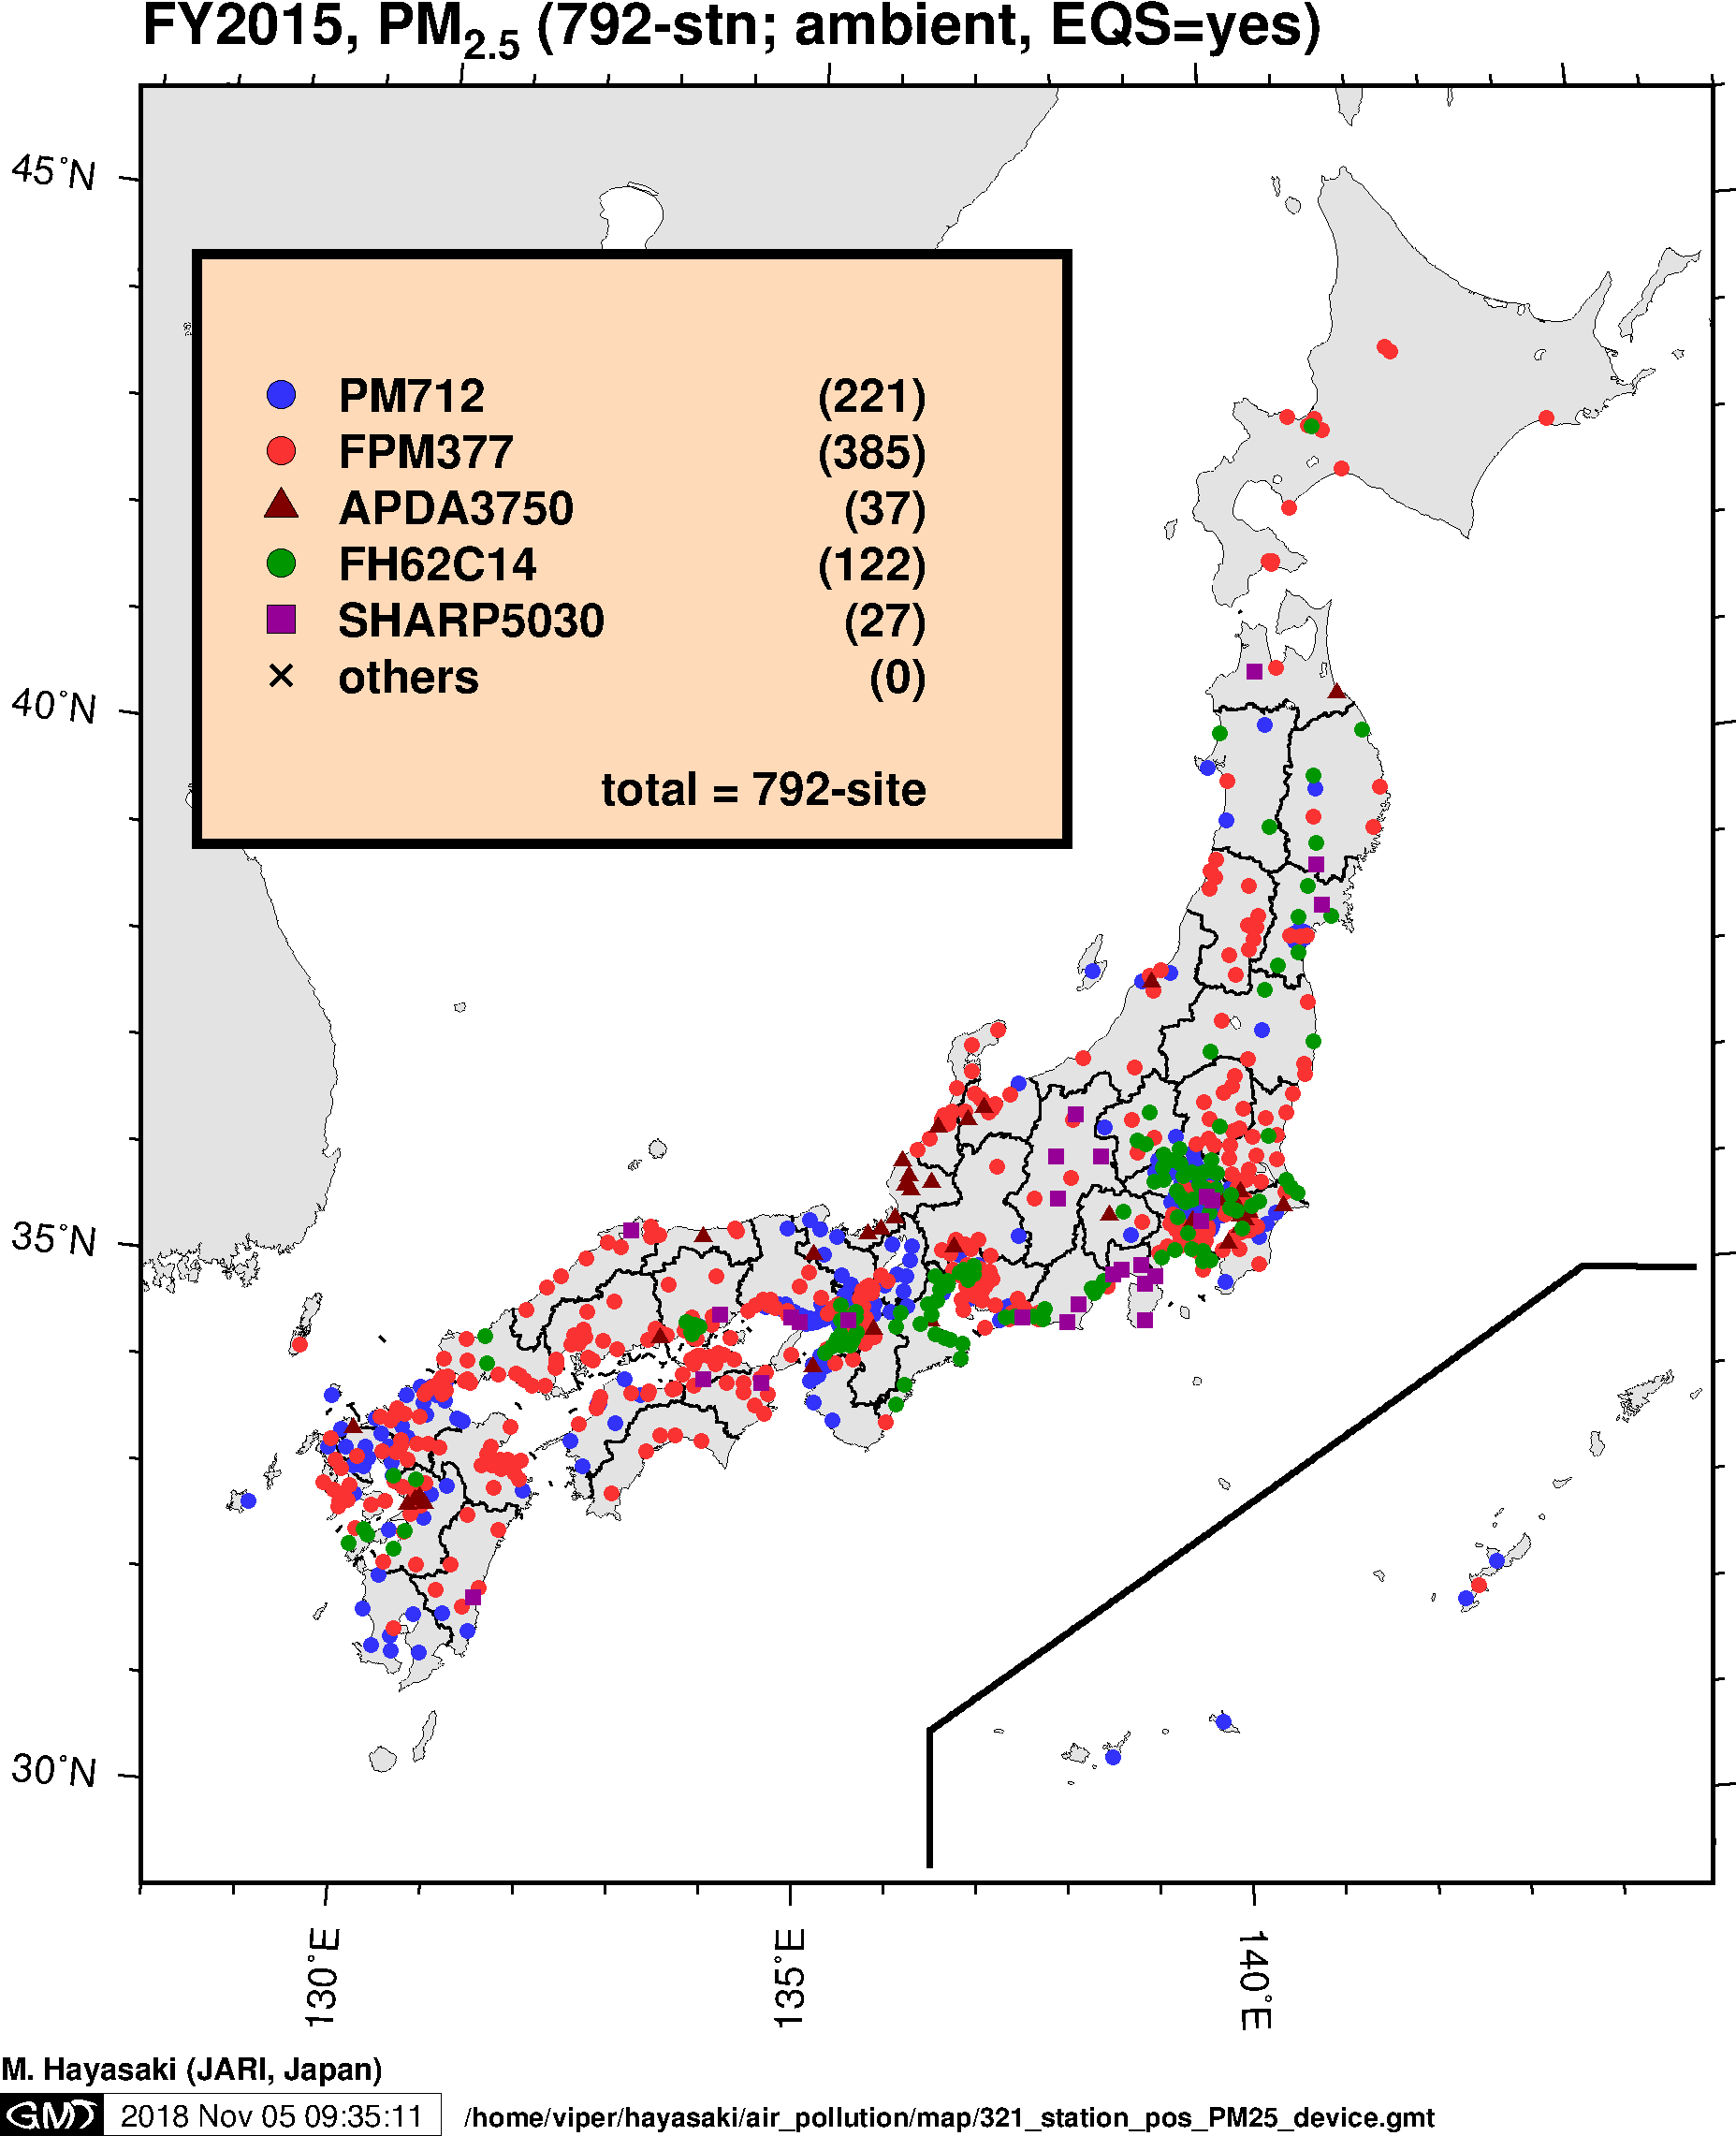 PM2.5 Monitoring devices in Japan (FY2015)